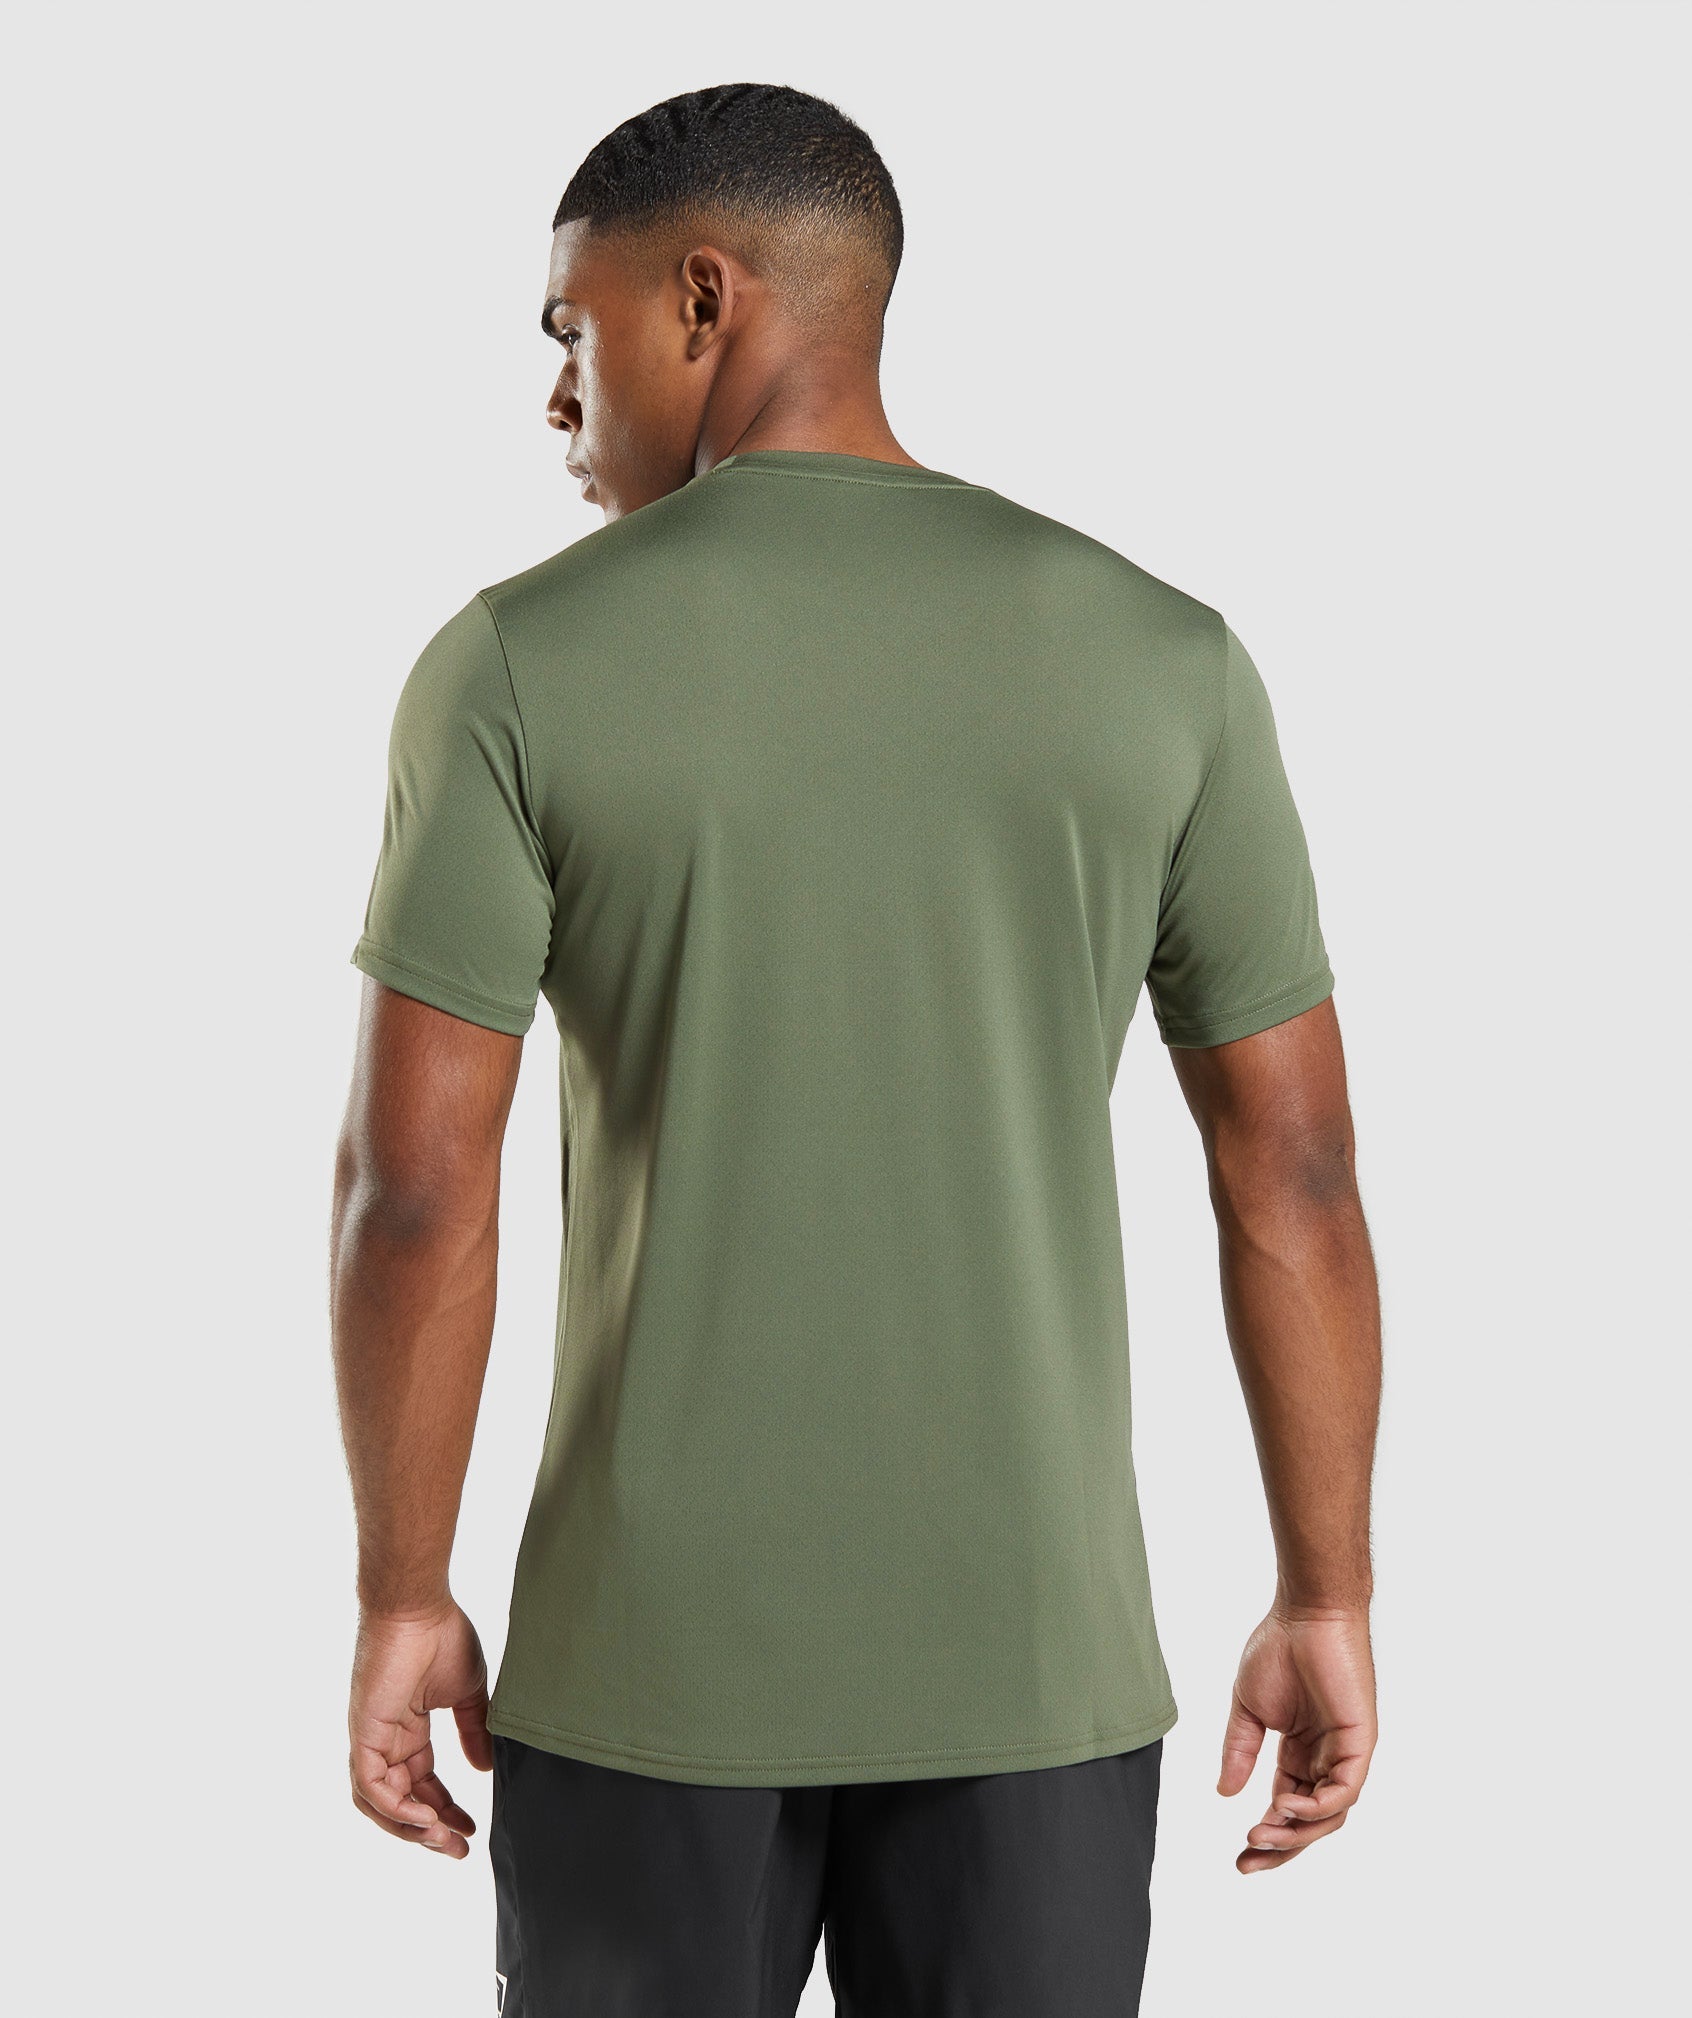 Arrival T-Shirt in Core Olive